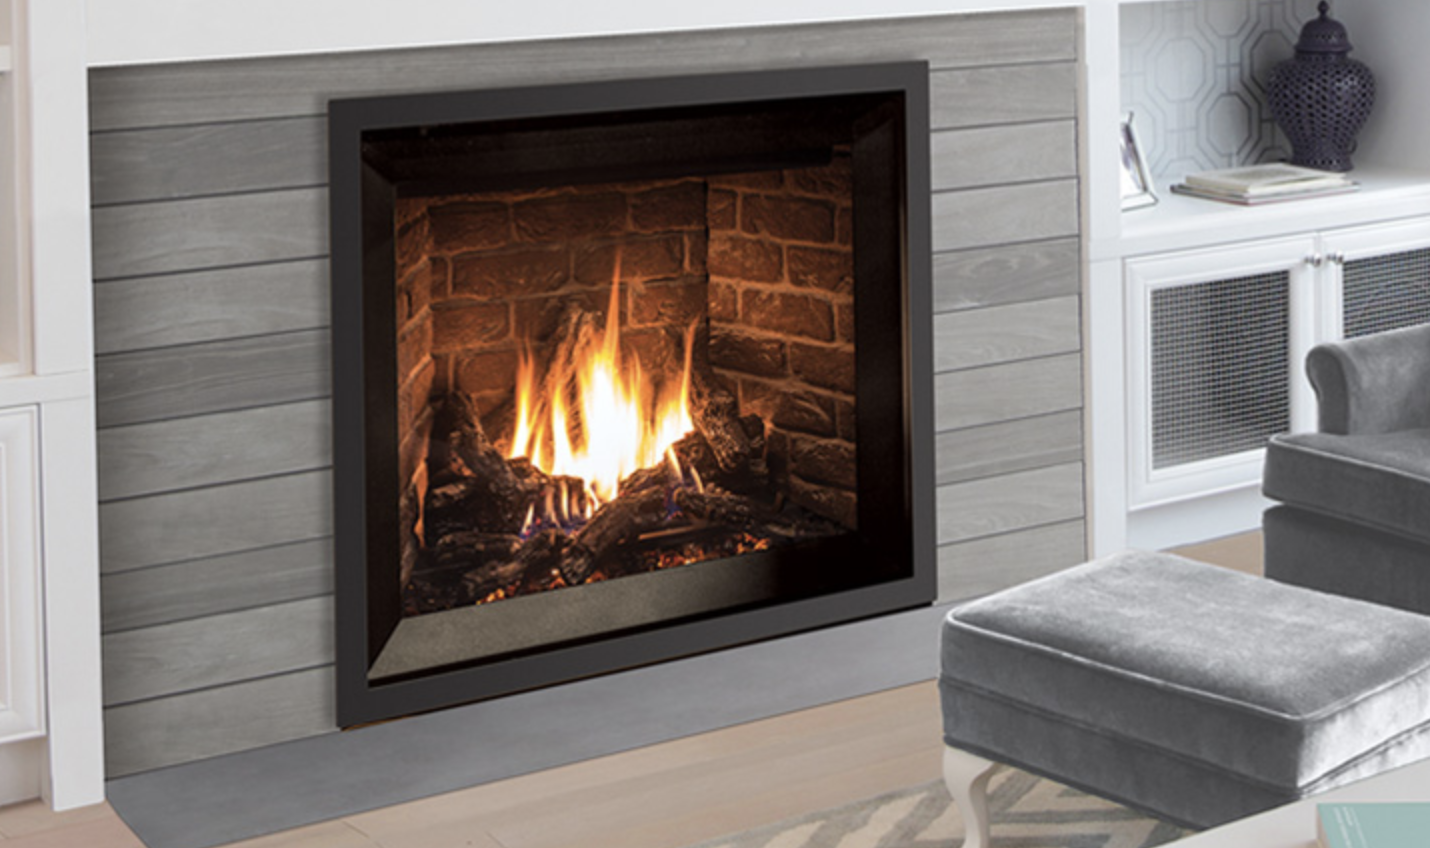 Enviro G39 Gas Natural Gas or Propane FireplaceFriendly Fires